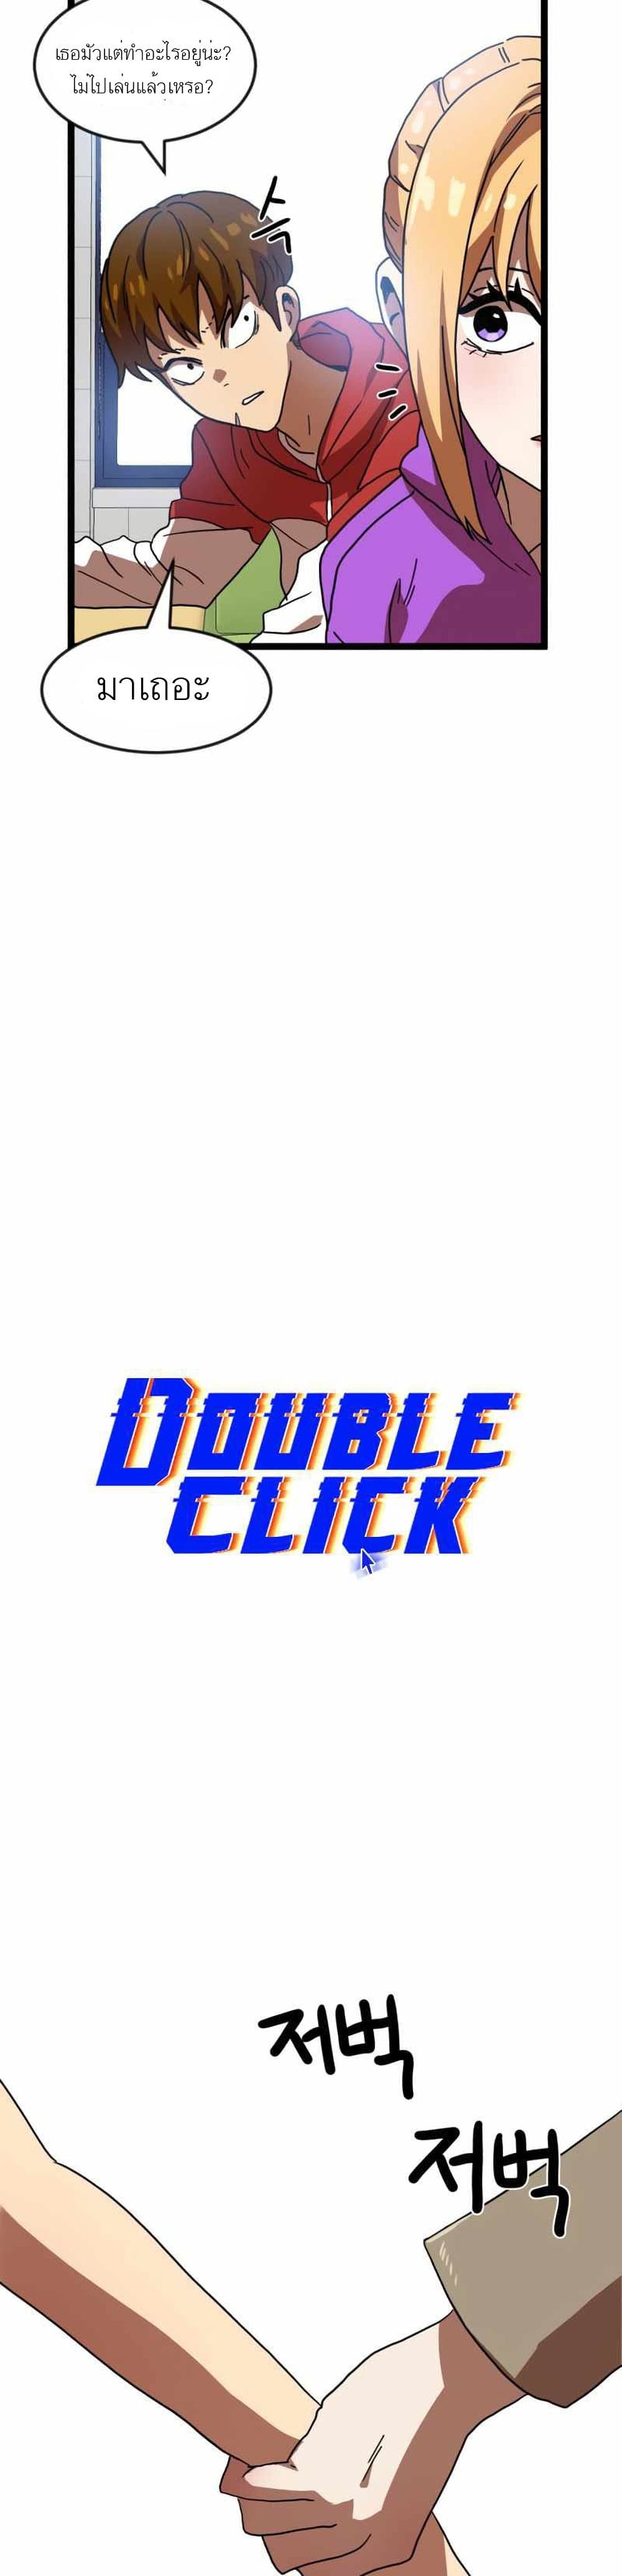 Double Click 42 06